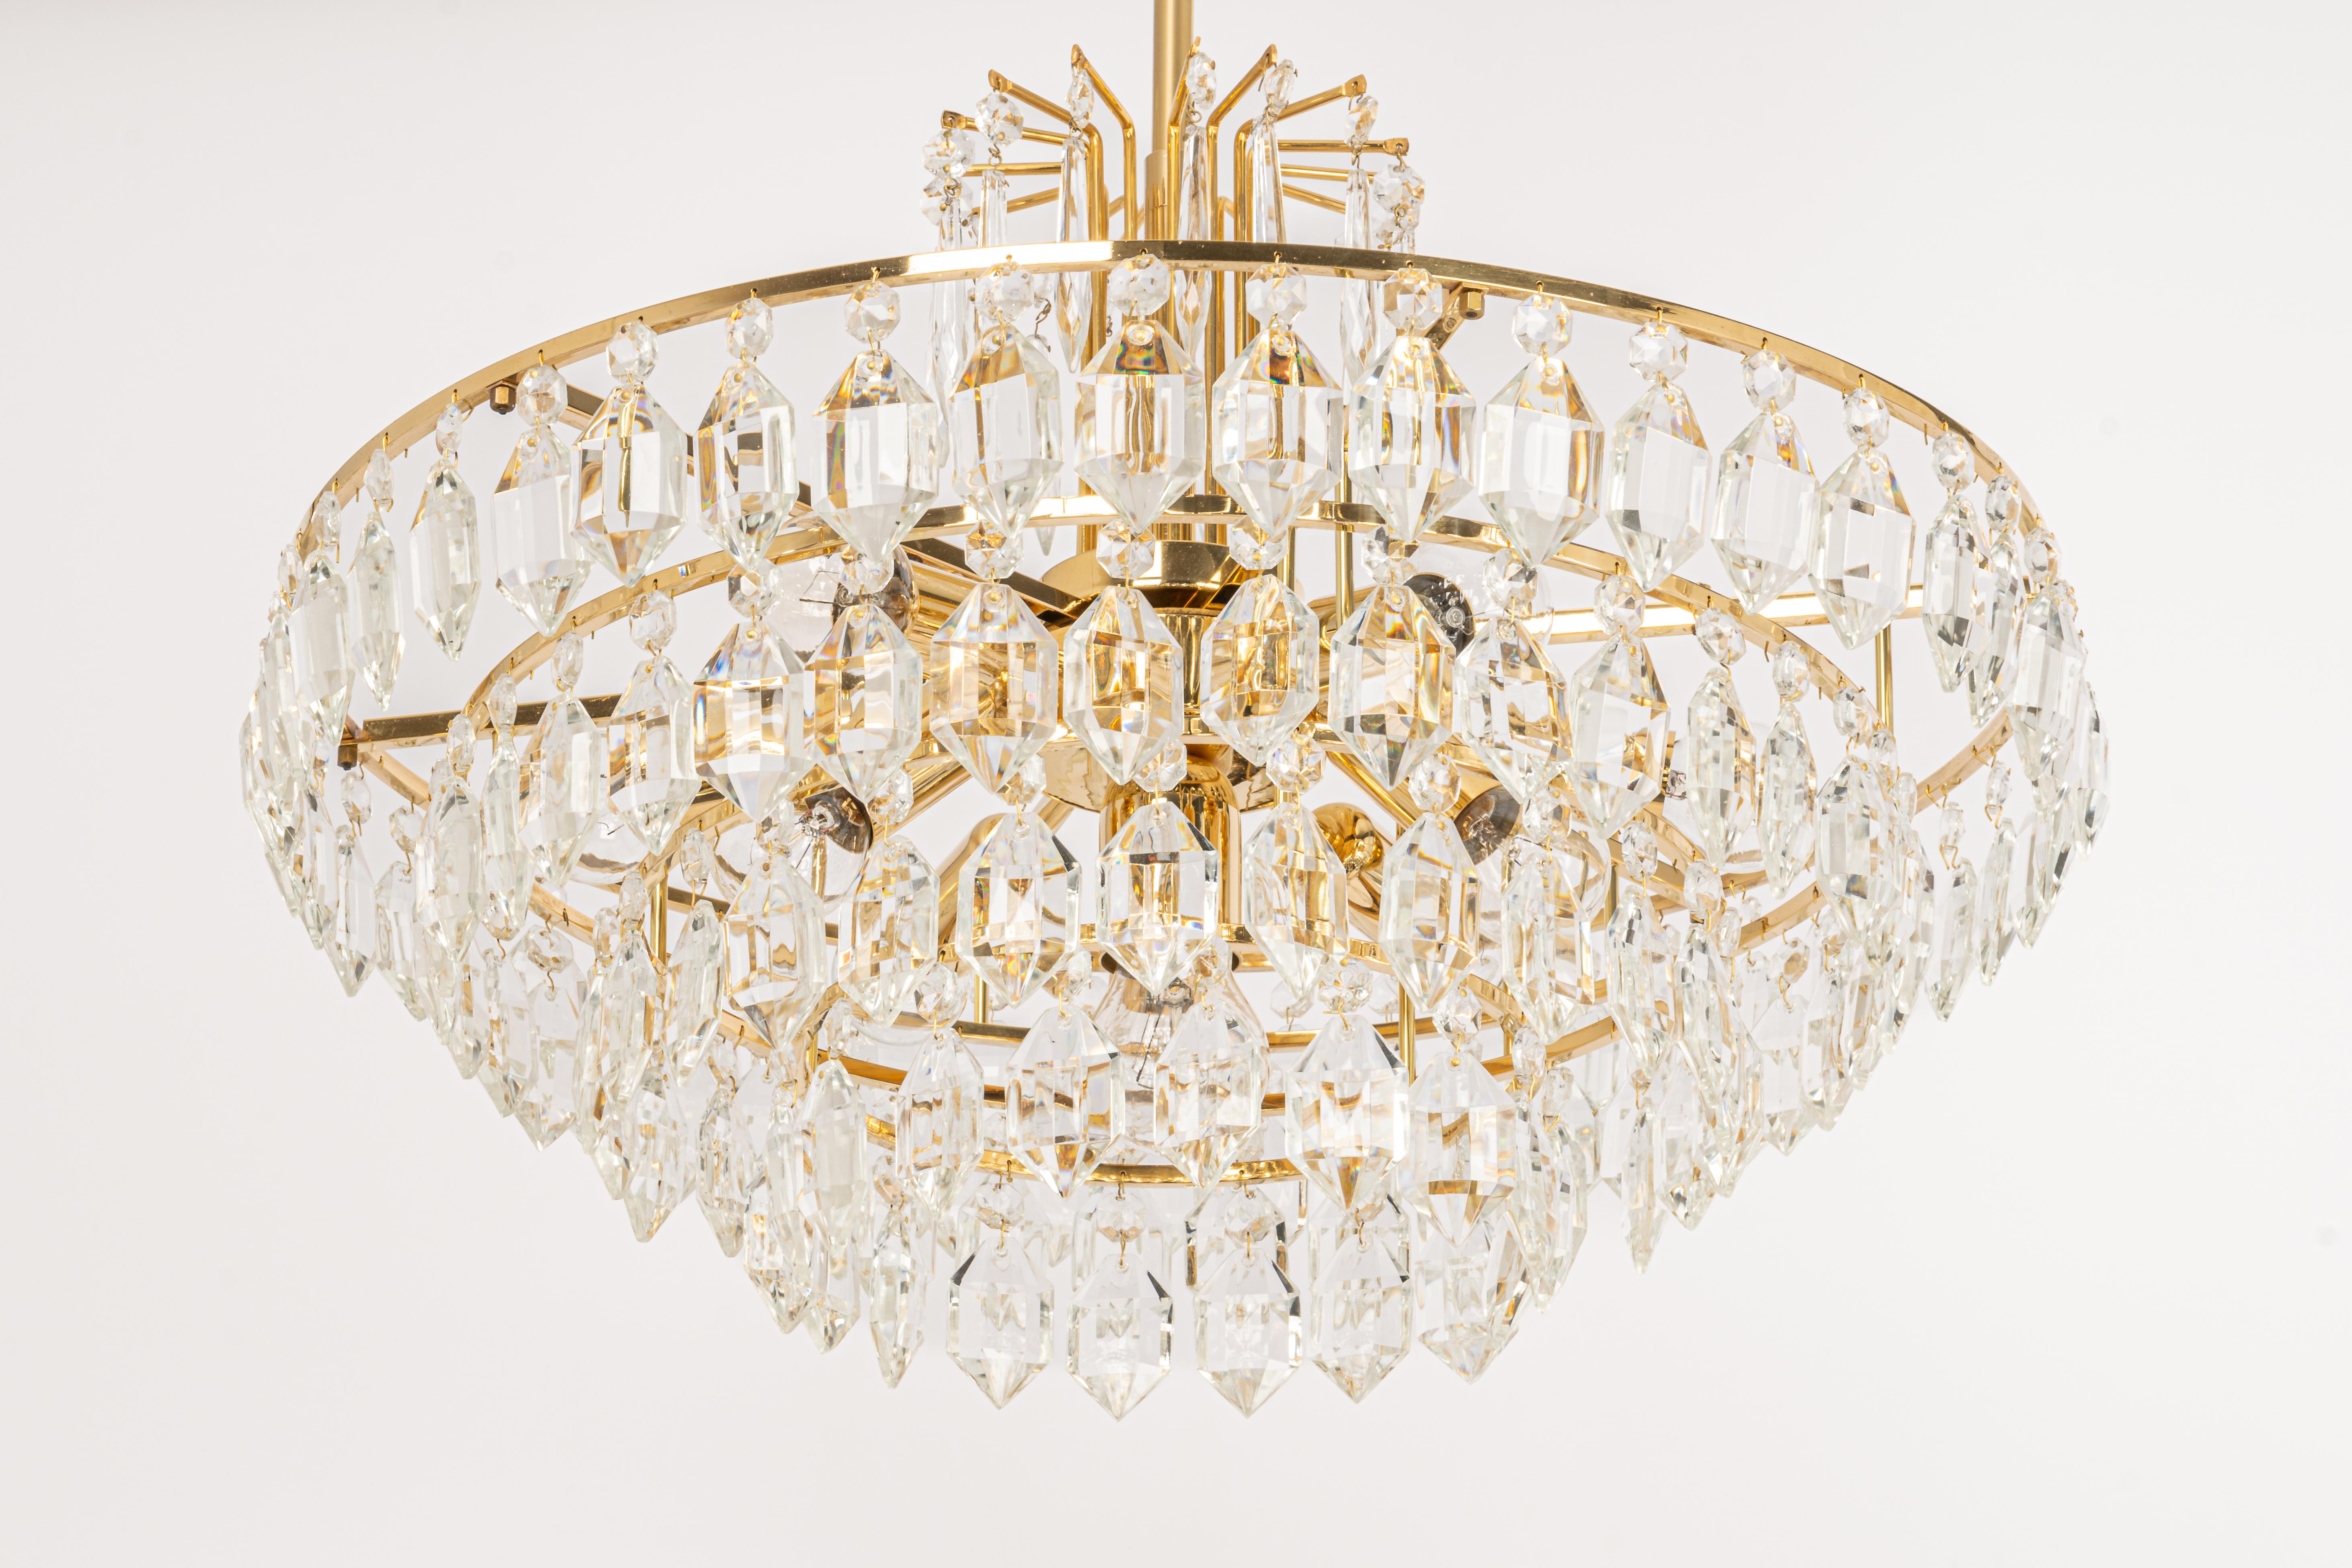 Austrian 1 of 2 Bakalowits Chandelier, Brass and Crystal Glass, Austria, 1960s For Sale